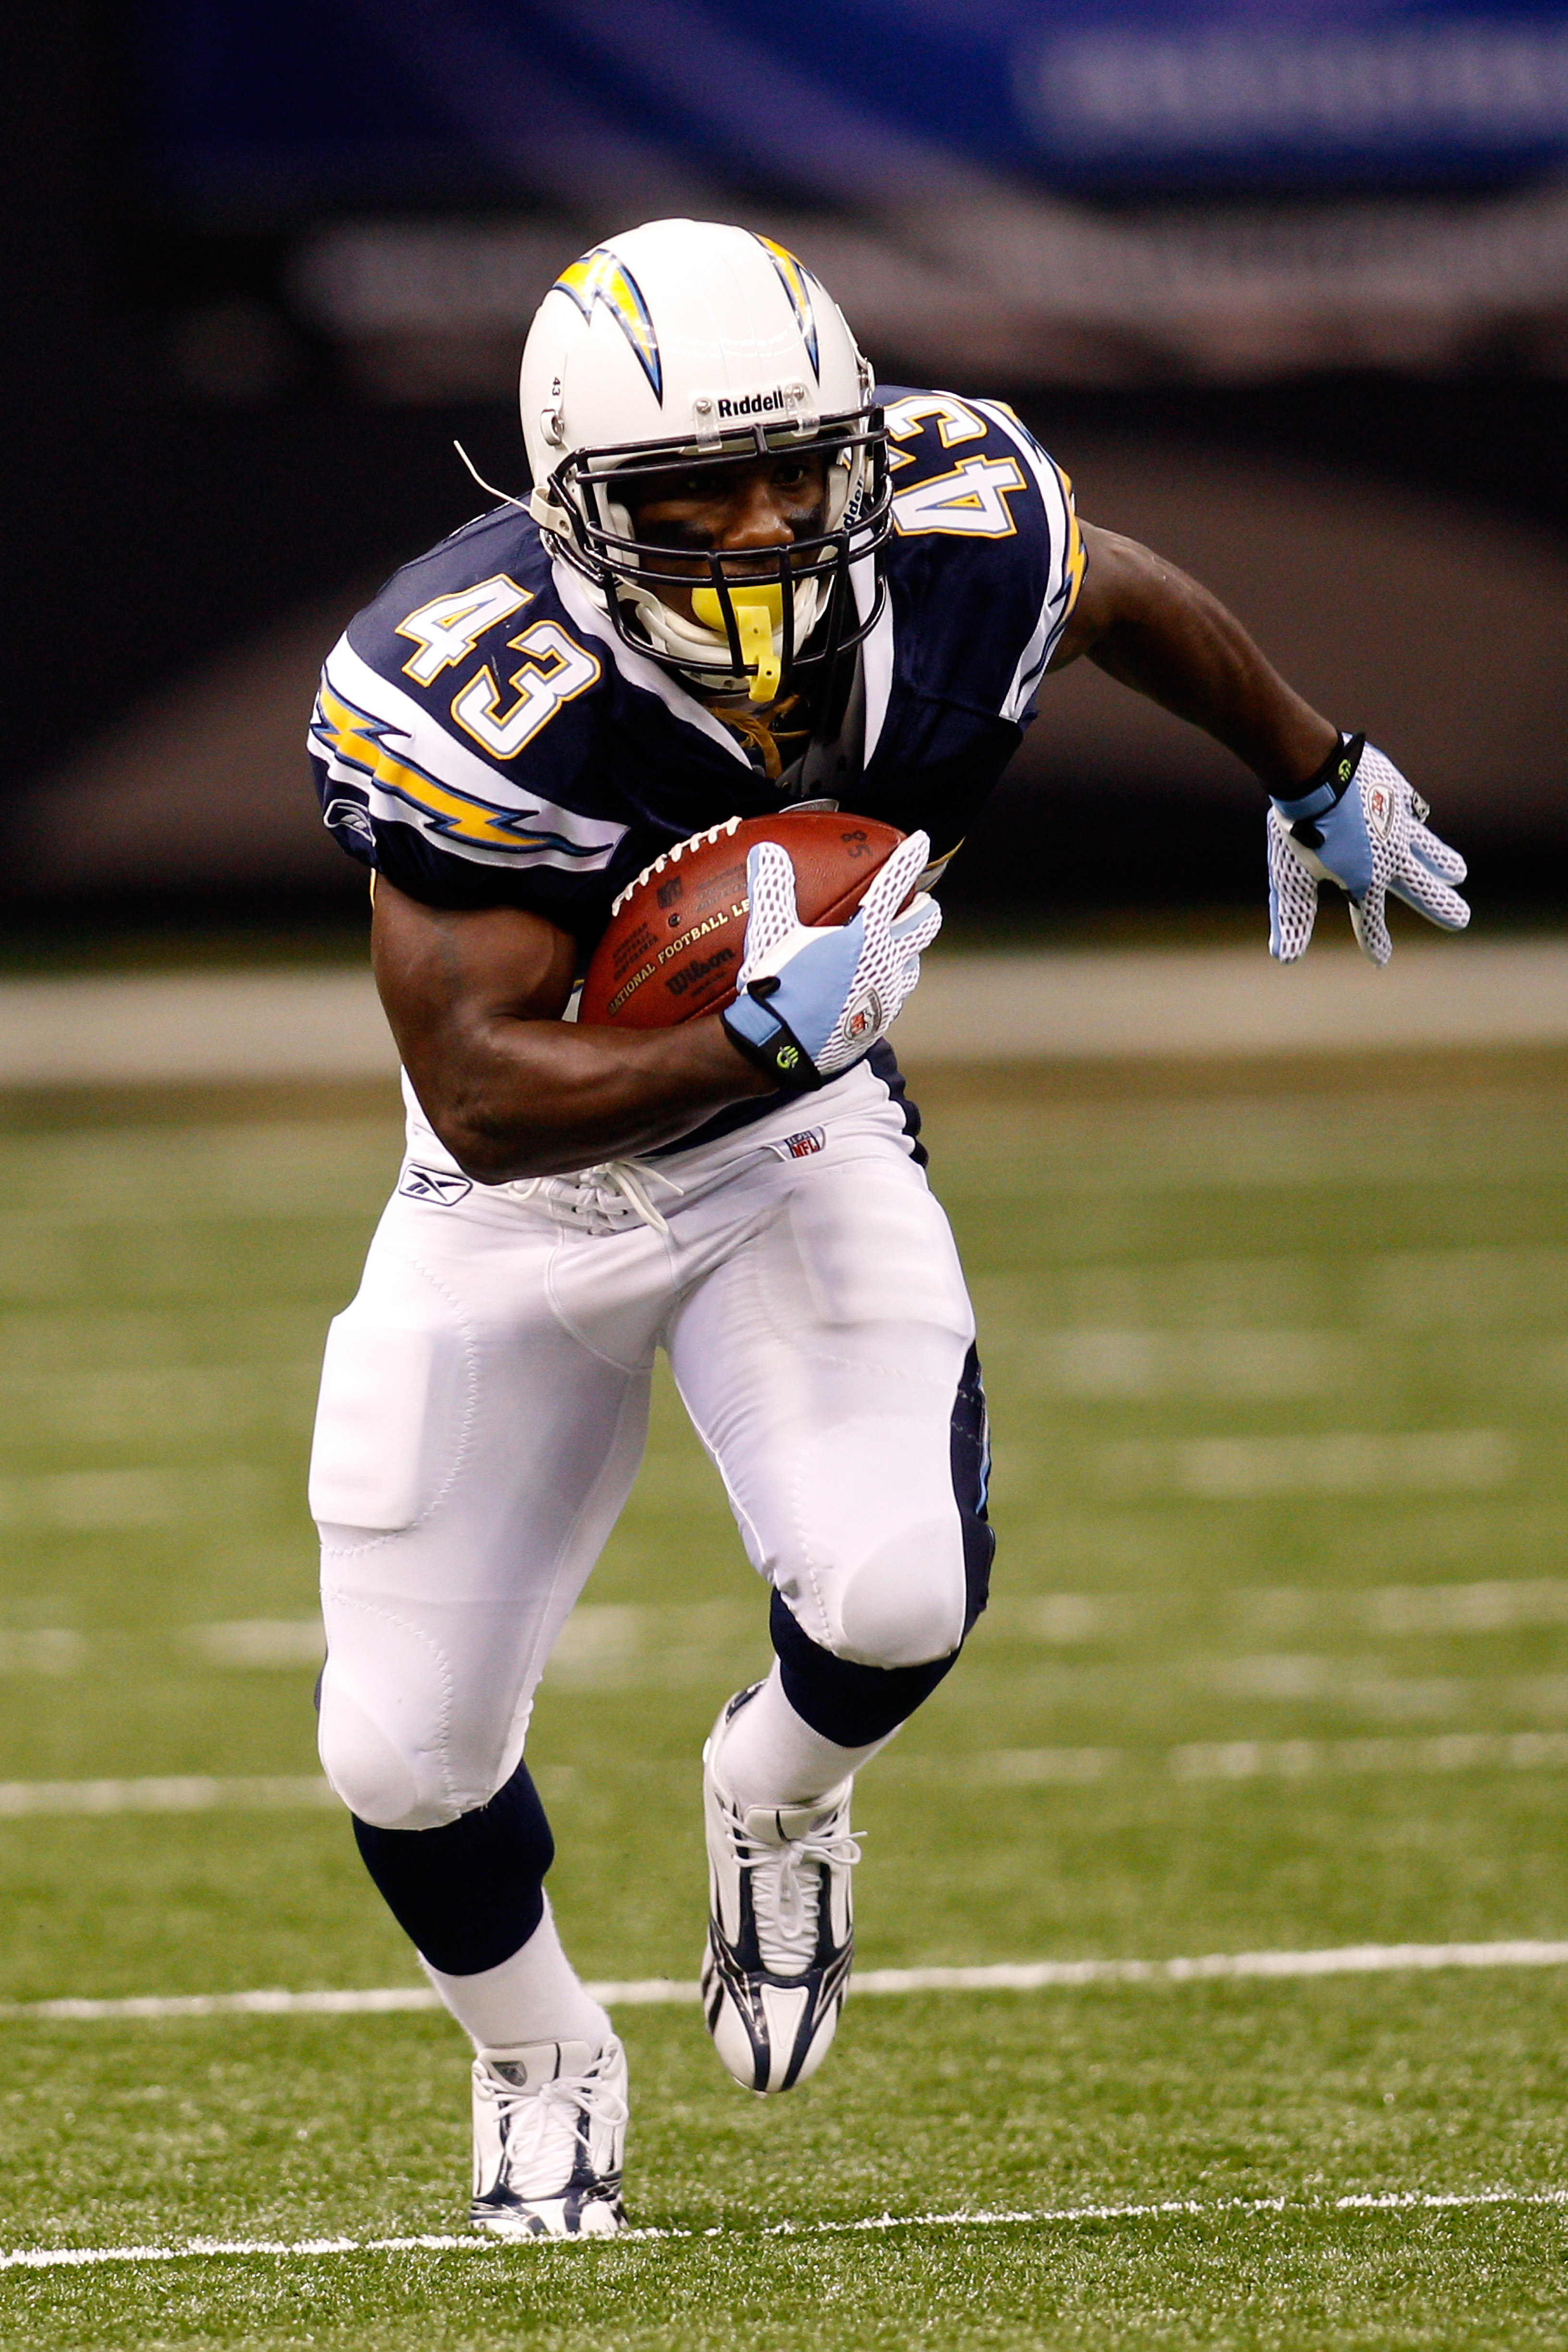 NEW ORLEANS - AUGUST 27:  Darren Sproles #43 of the San Diego Chargers in action against the New Orleans Saints at the Louisiana Superdome on August 27, 2010 in New Orleans, Louisiana.  (Photo by Chris Graythen/Getty Images)